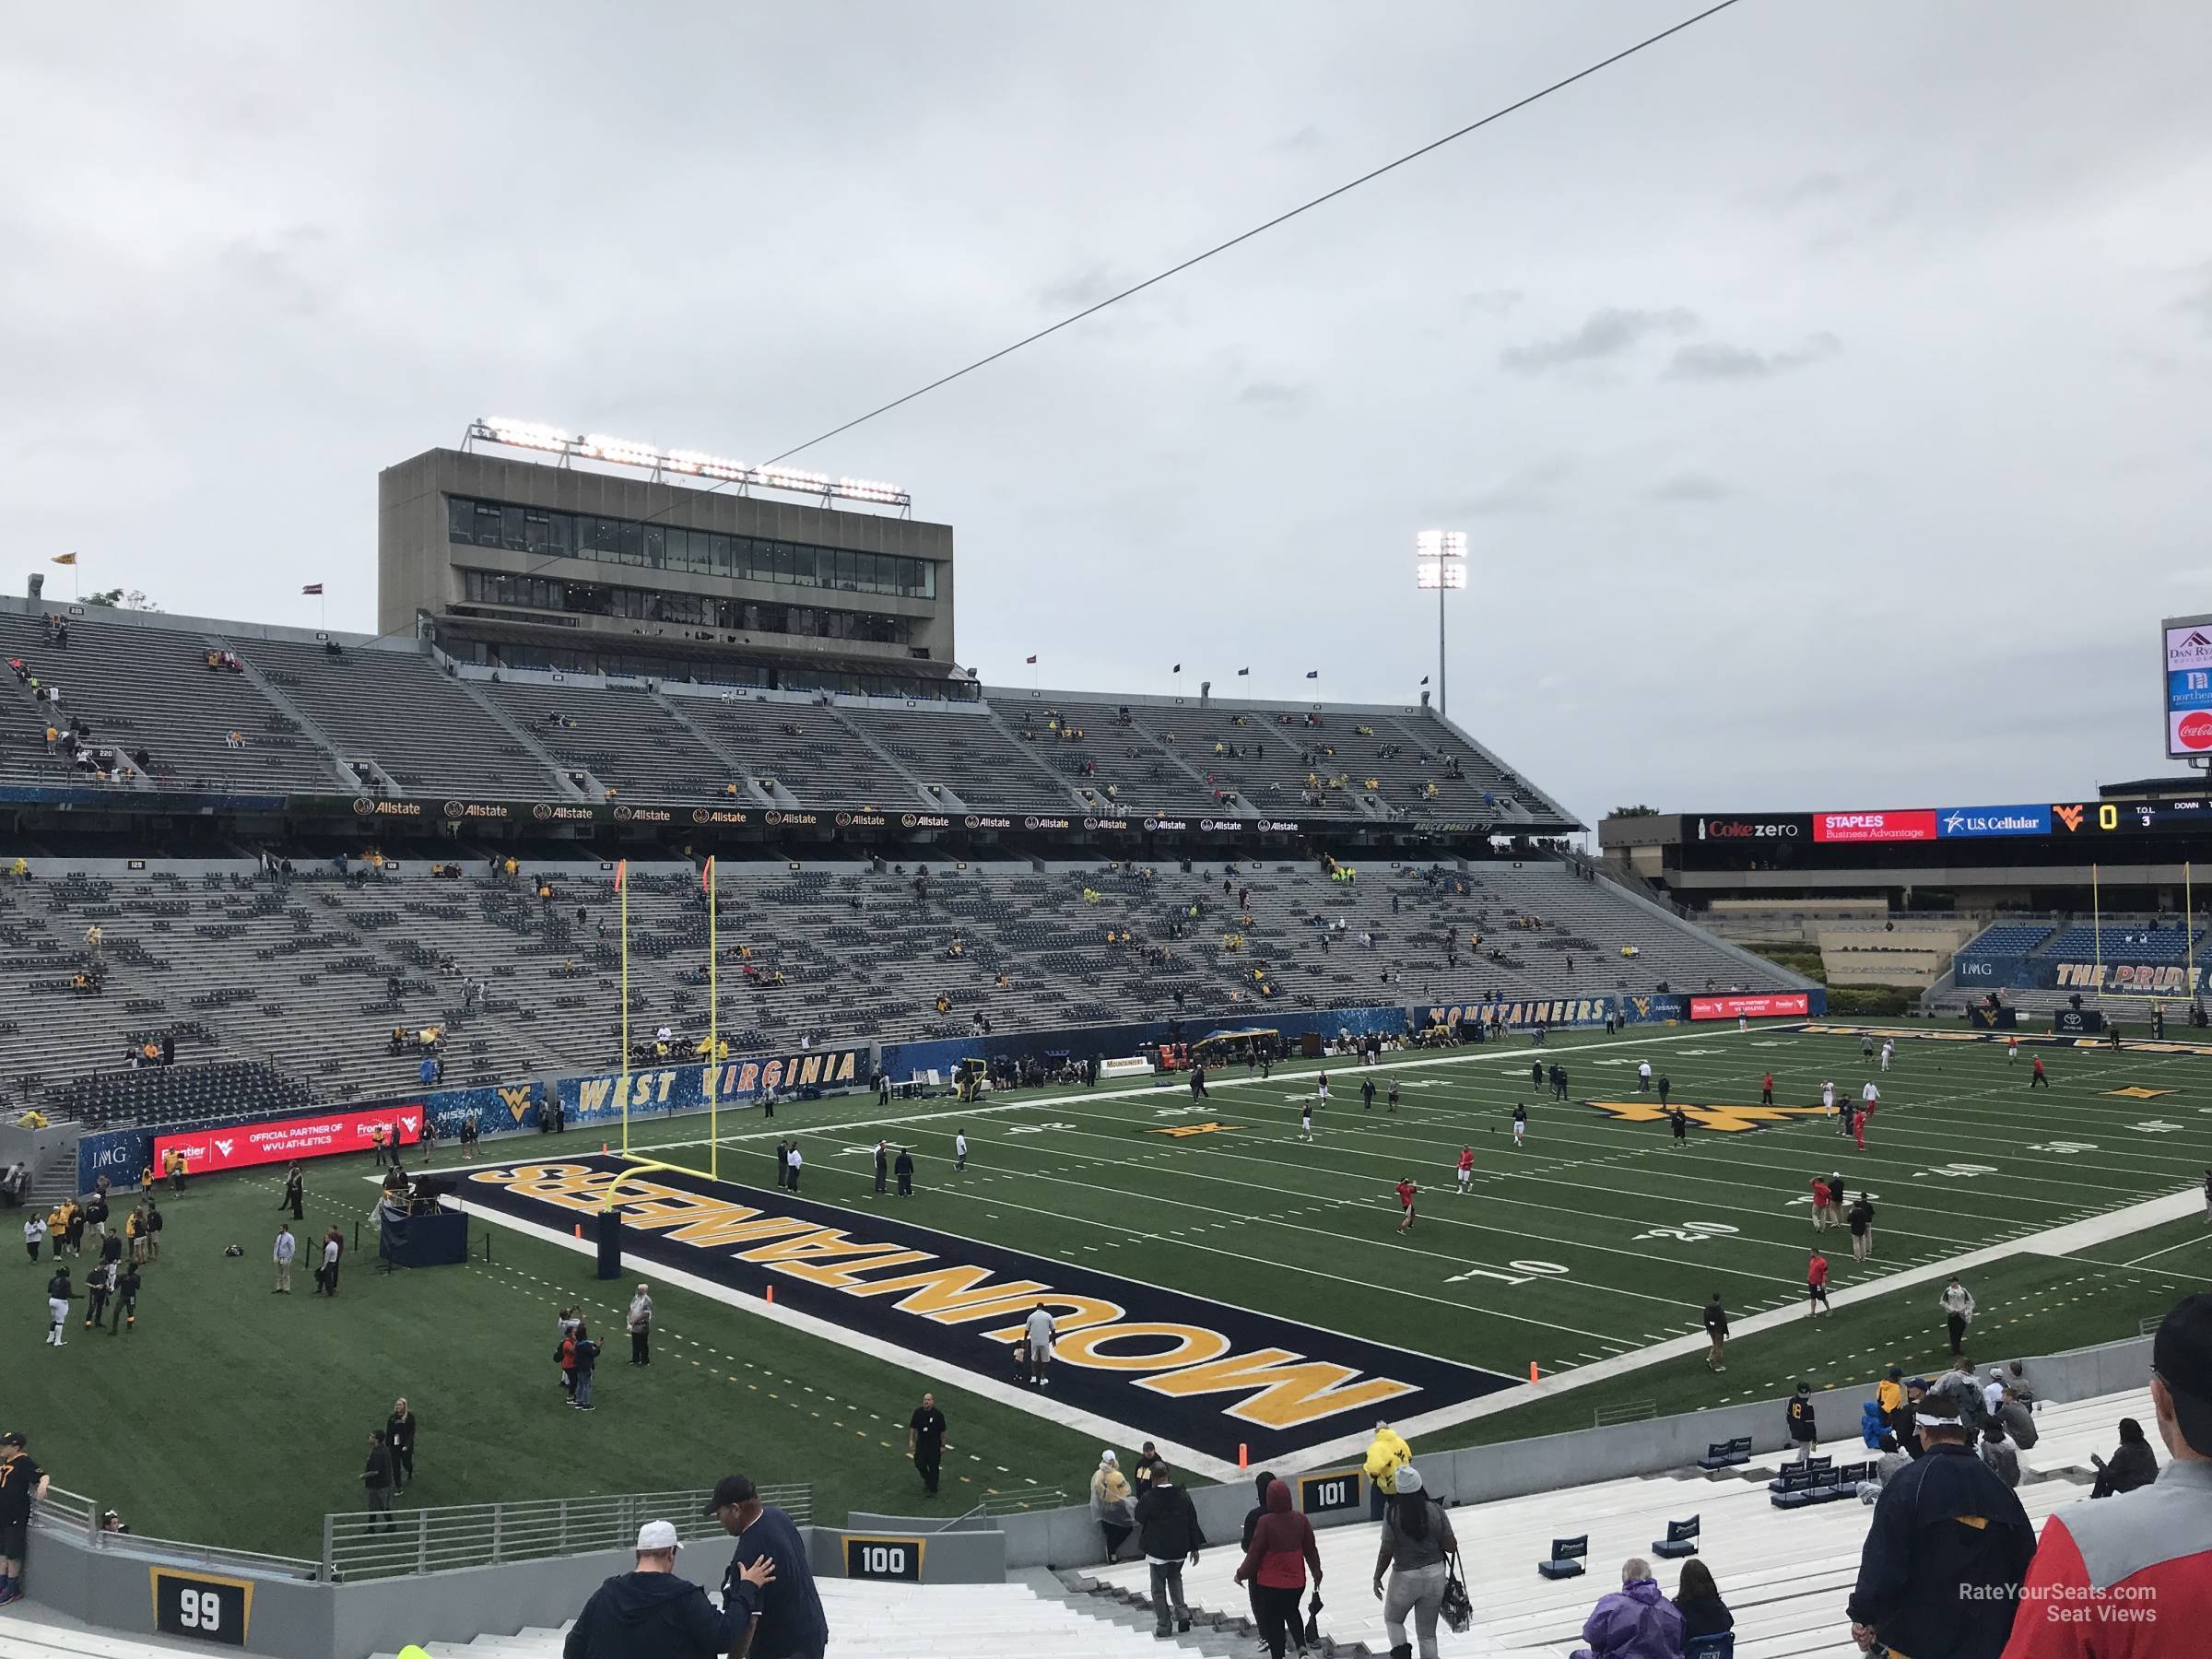 section 100, row 35 seat view  - mountaineer field